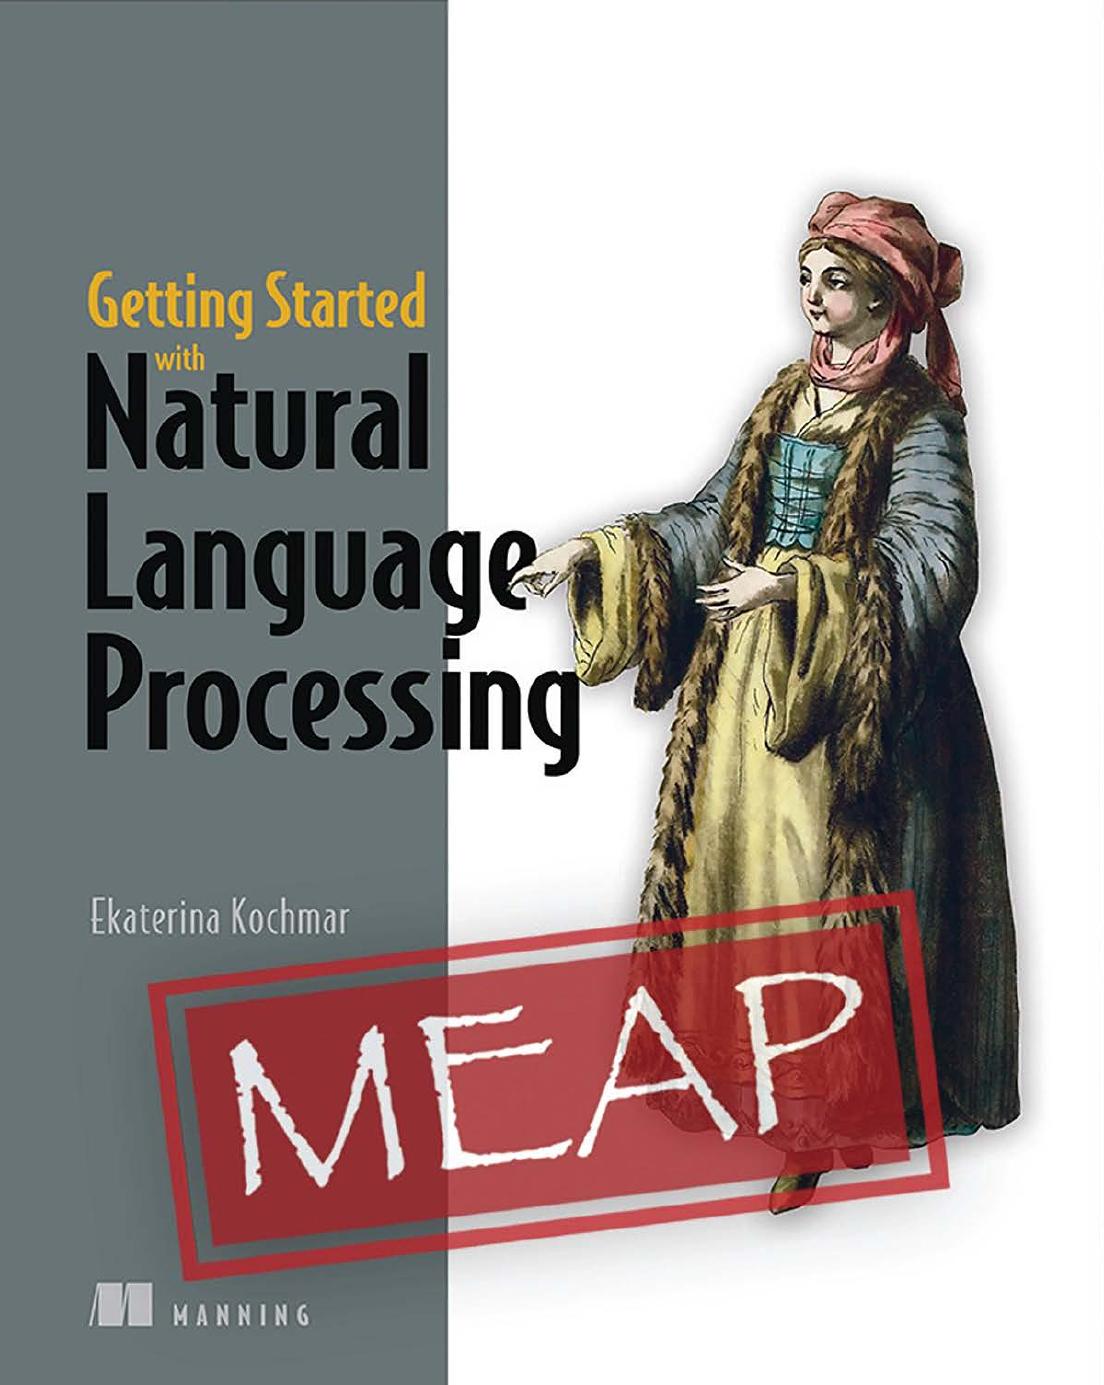 Getting Started With Natural Language Processing